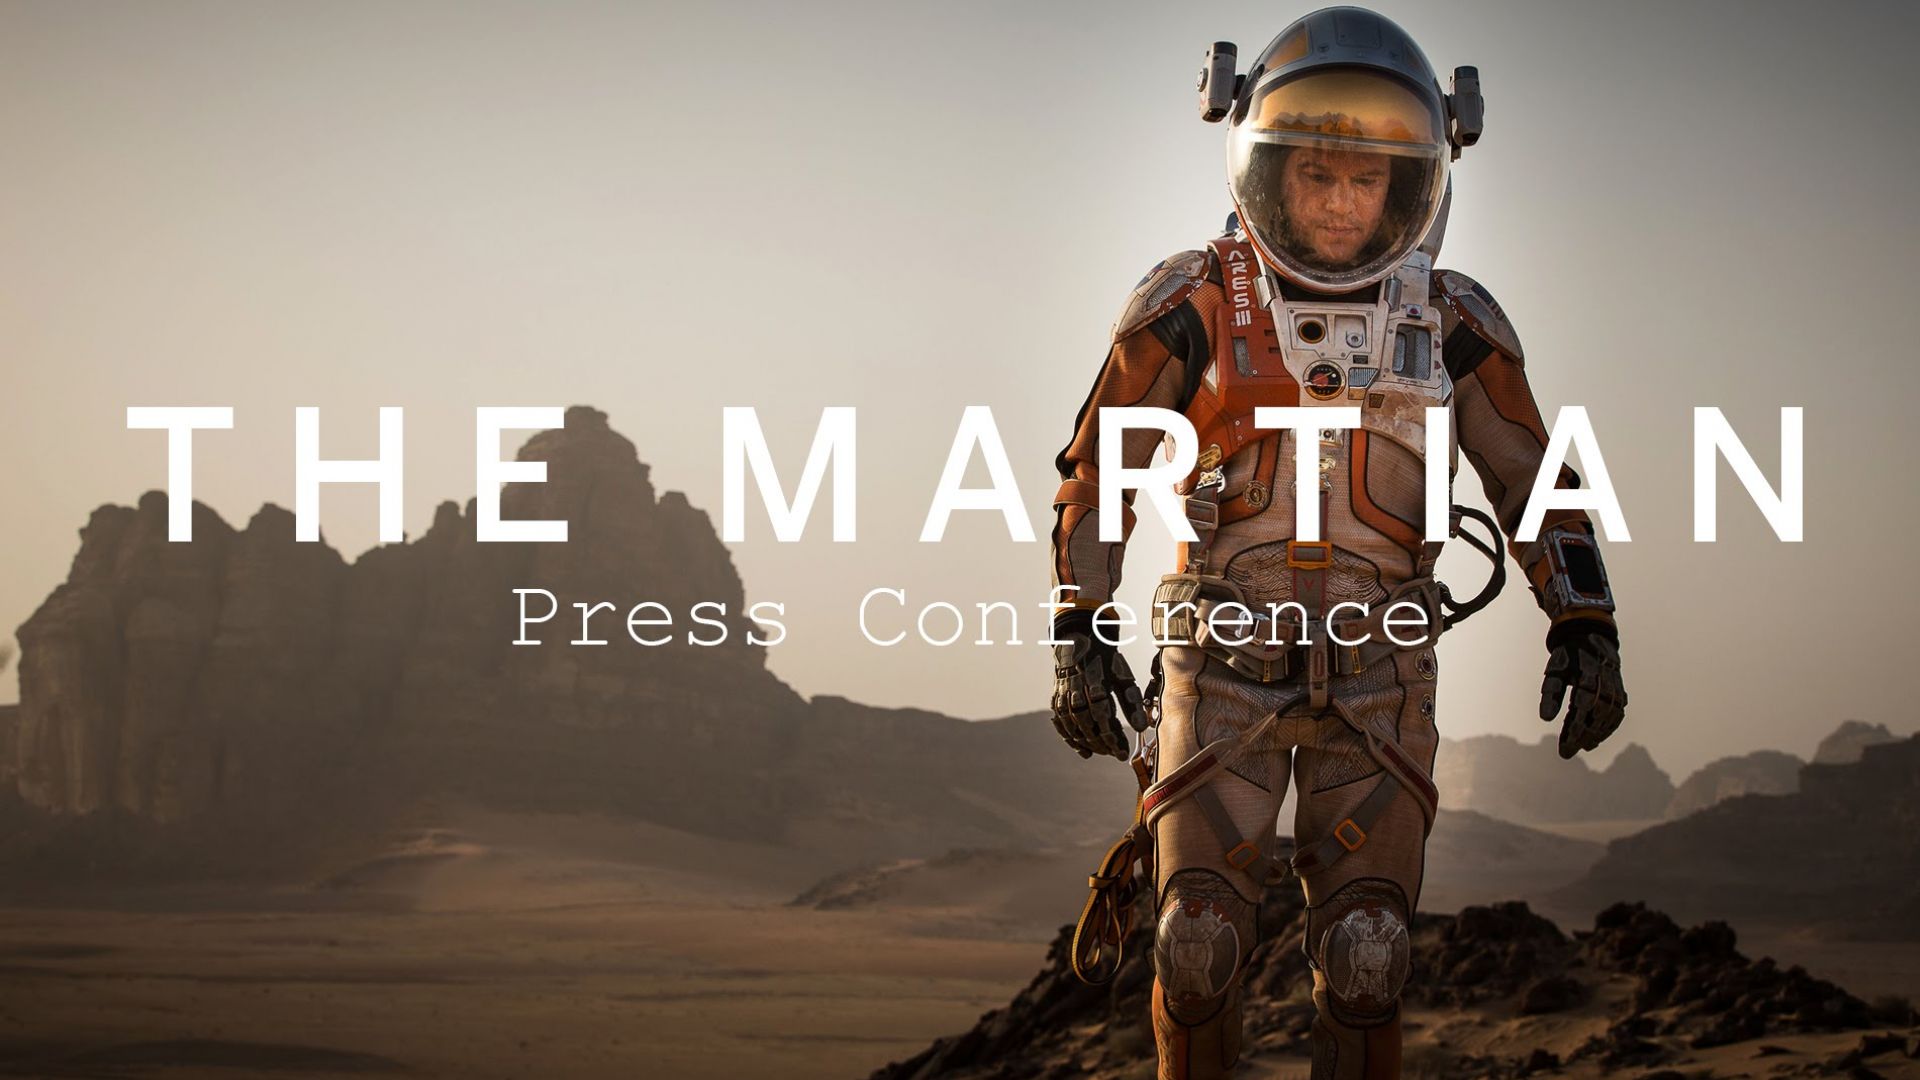 Watch Full TIFF Press Conference for &#039;The Martian&#039; with Ridl